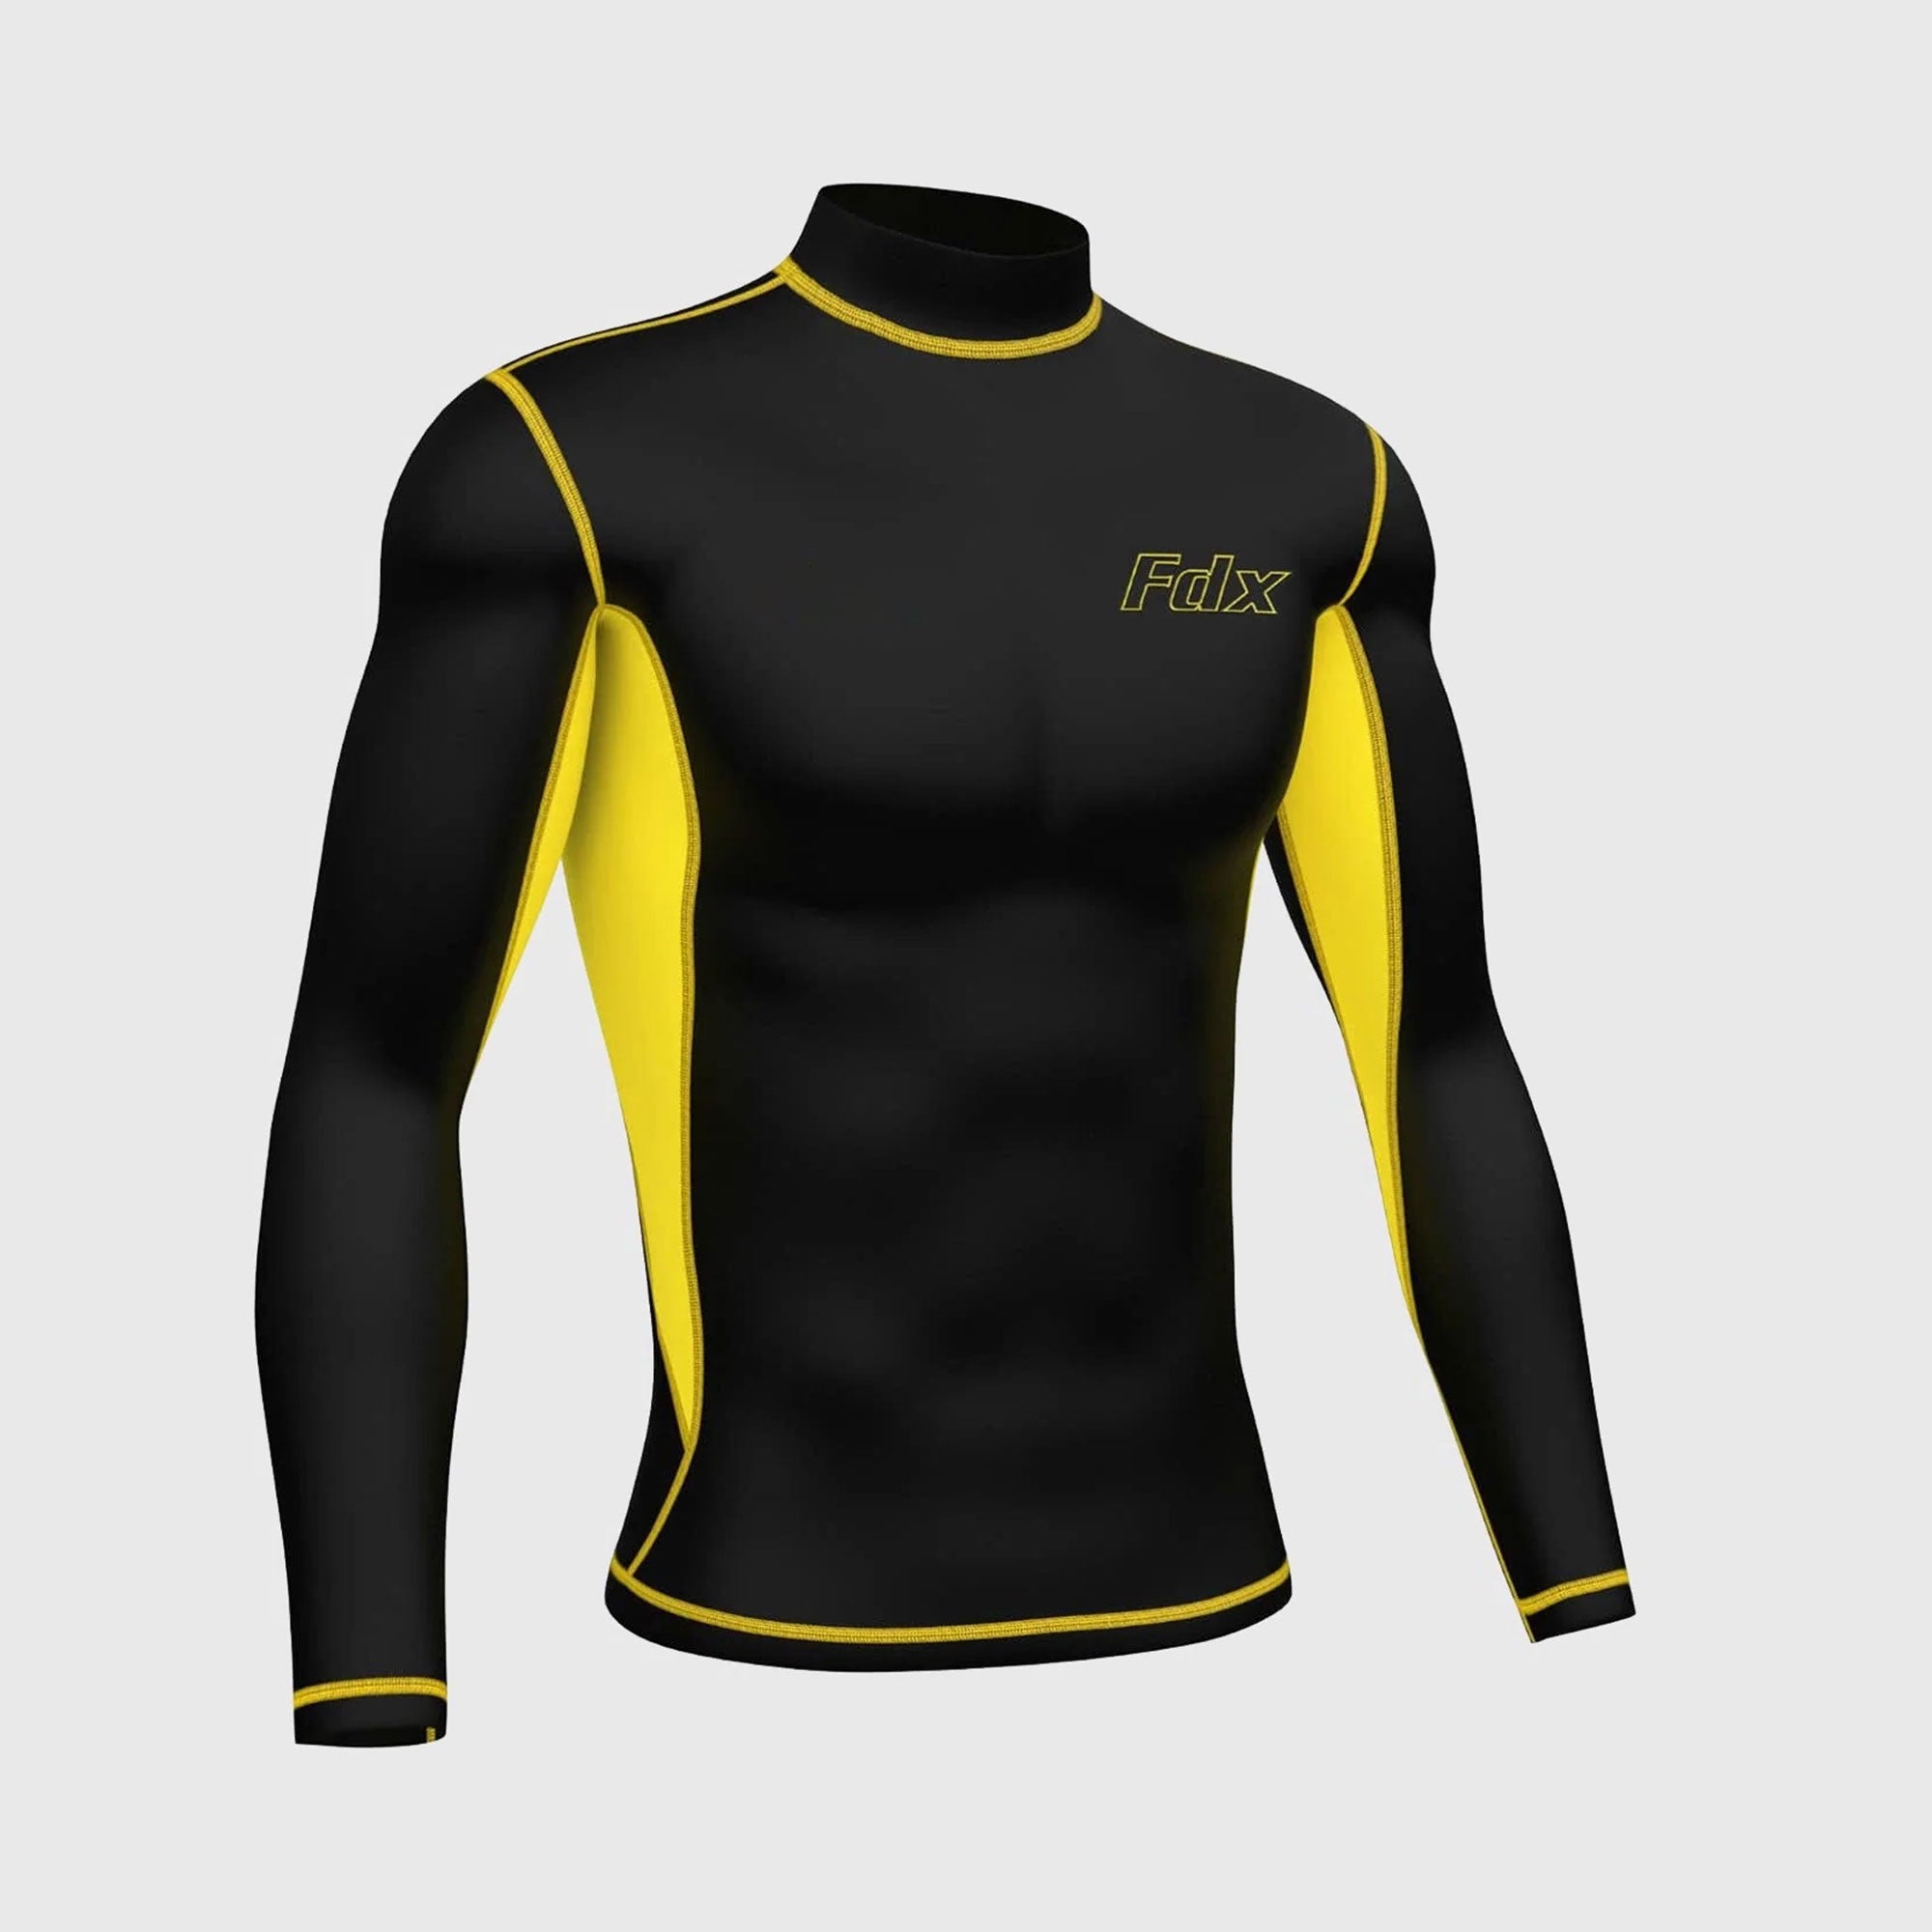 Fdx Mens Black & Yellow Long Sleeve Compression Top Running Gym Workout Wear Rash Guard Stretchable Breathable - Inorex